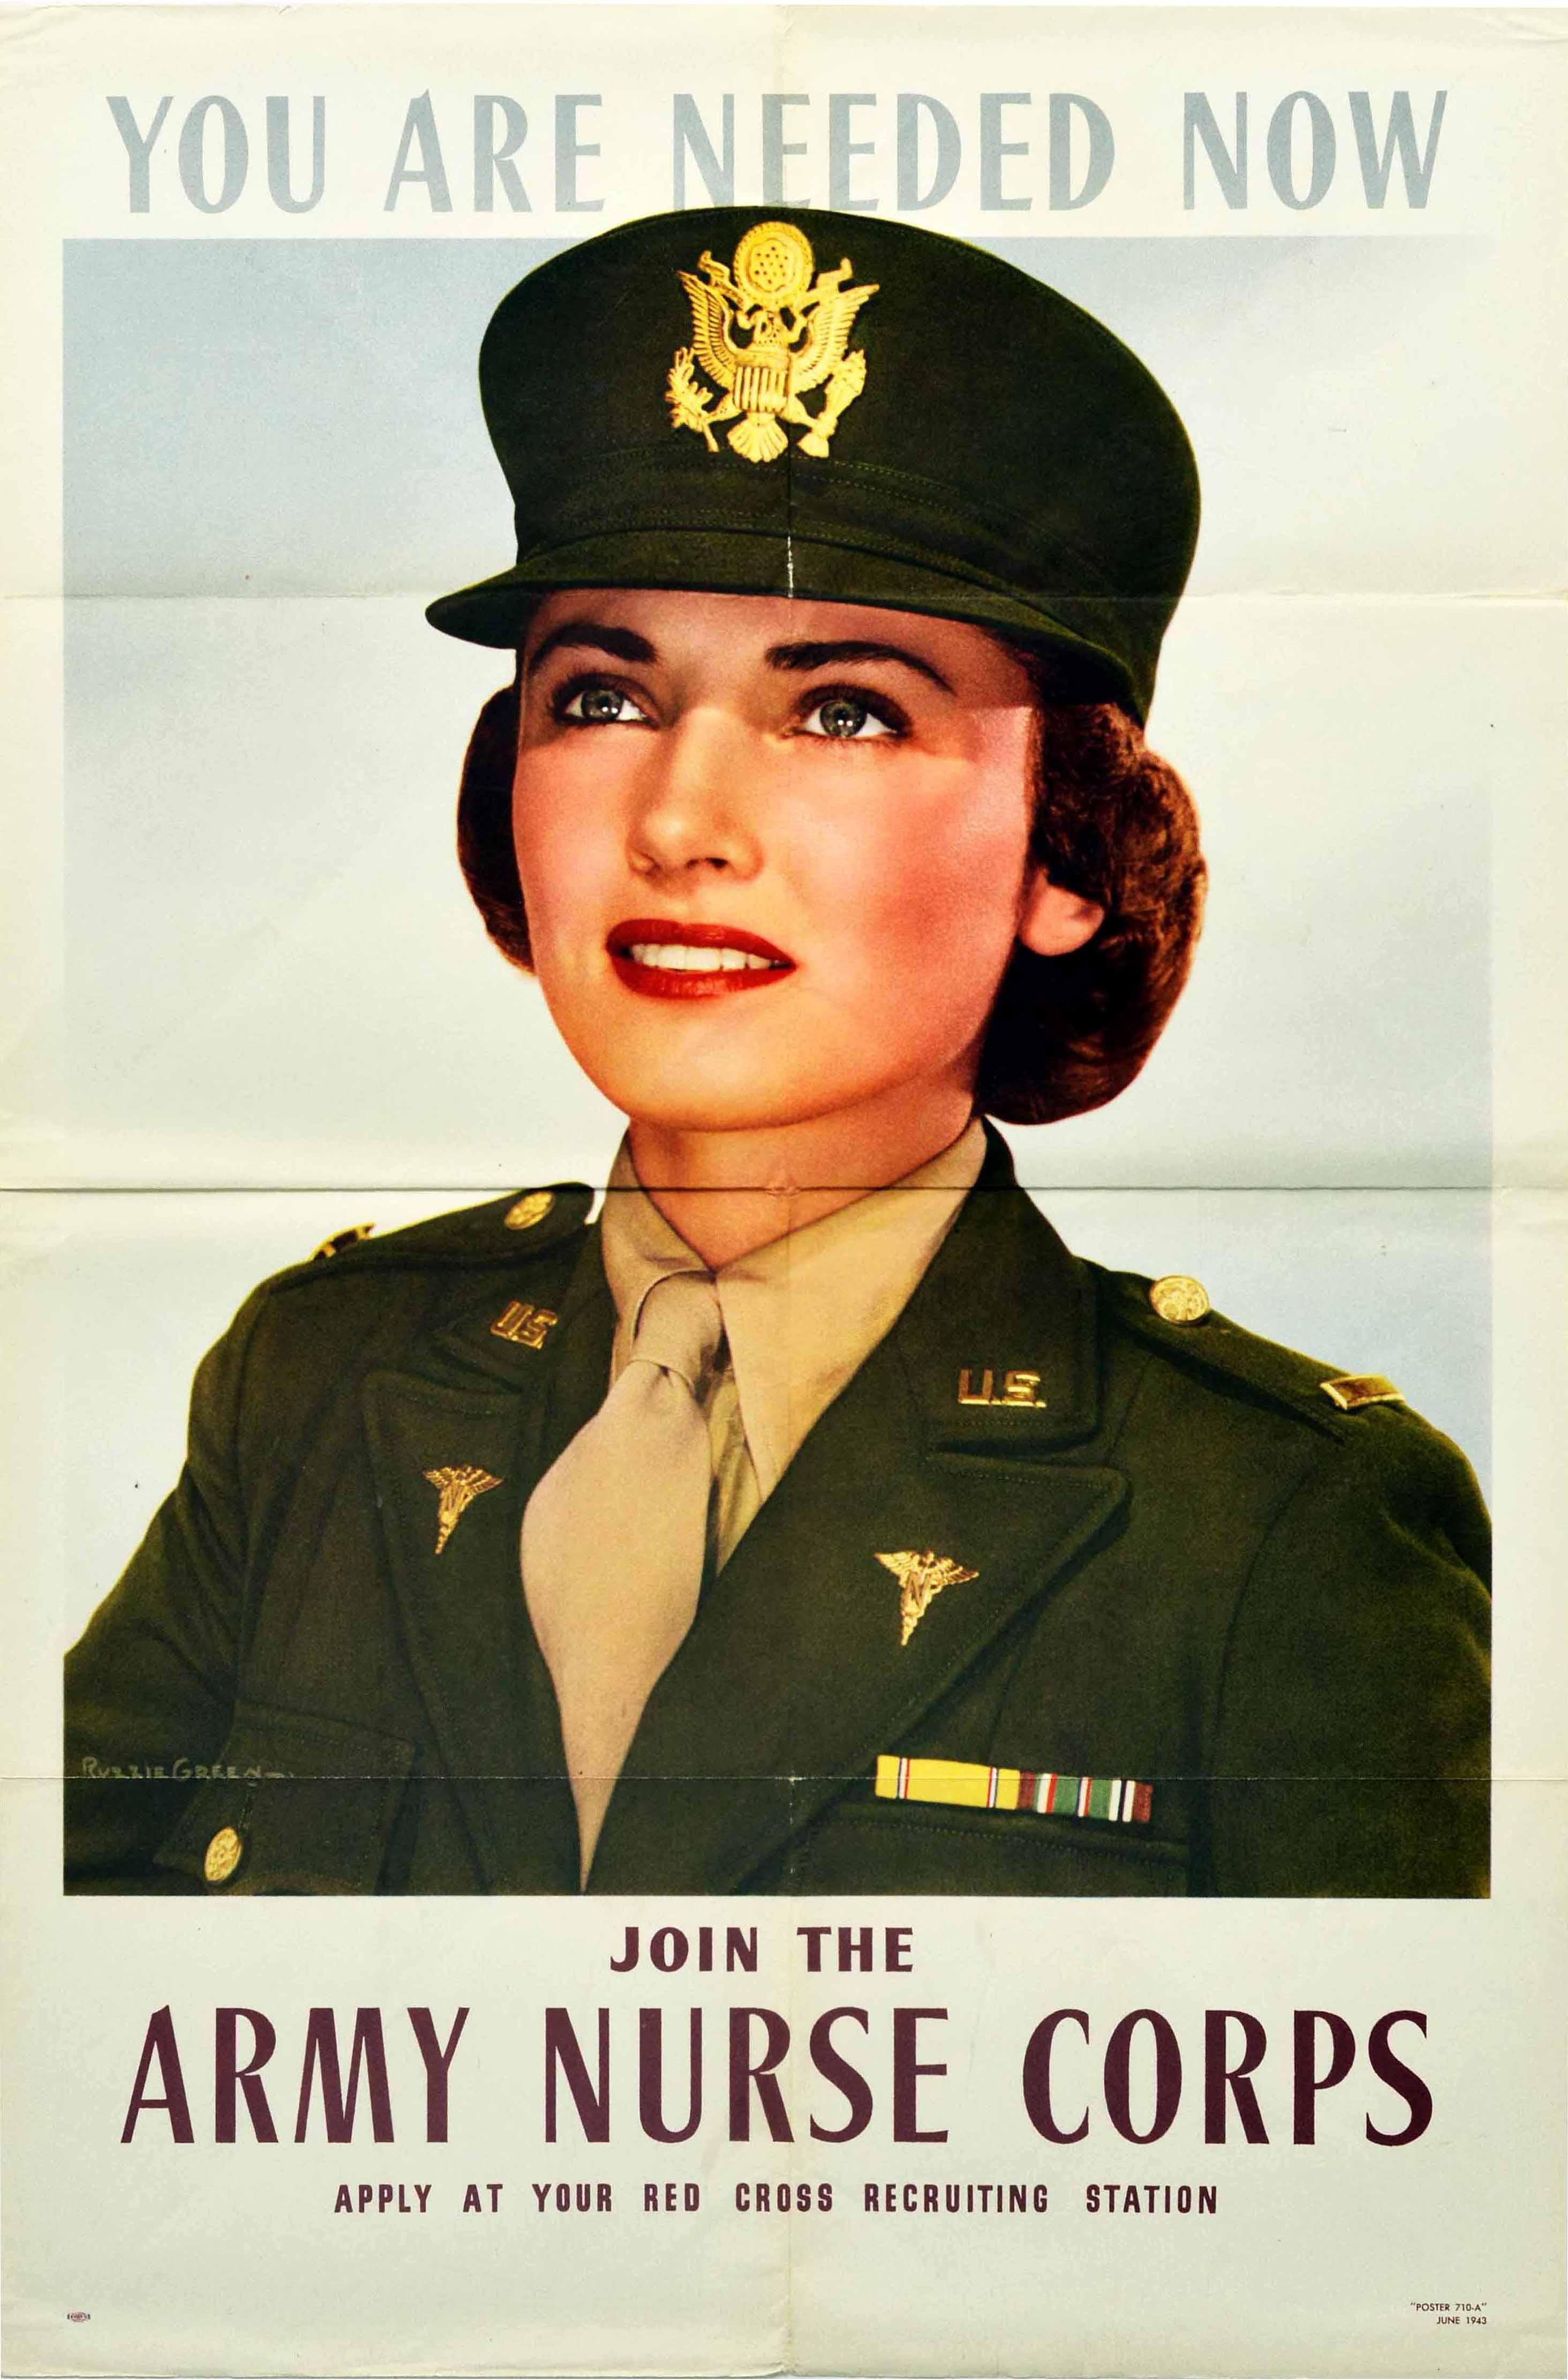 Original vintage World War Two recruitment poster calling for nurses - You are needed now Join the Army Nurse Corps Apply at your Red Cross recruiting station - featuring an elegant photo by the notable American photographer Ruzzie Green (Kneeland